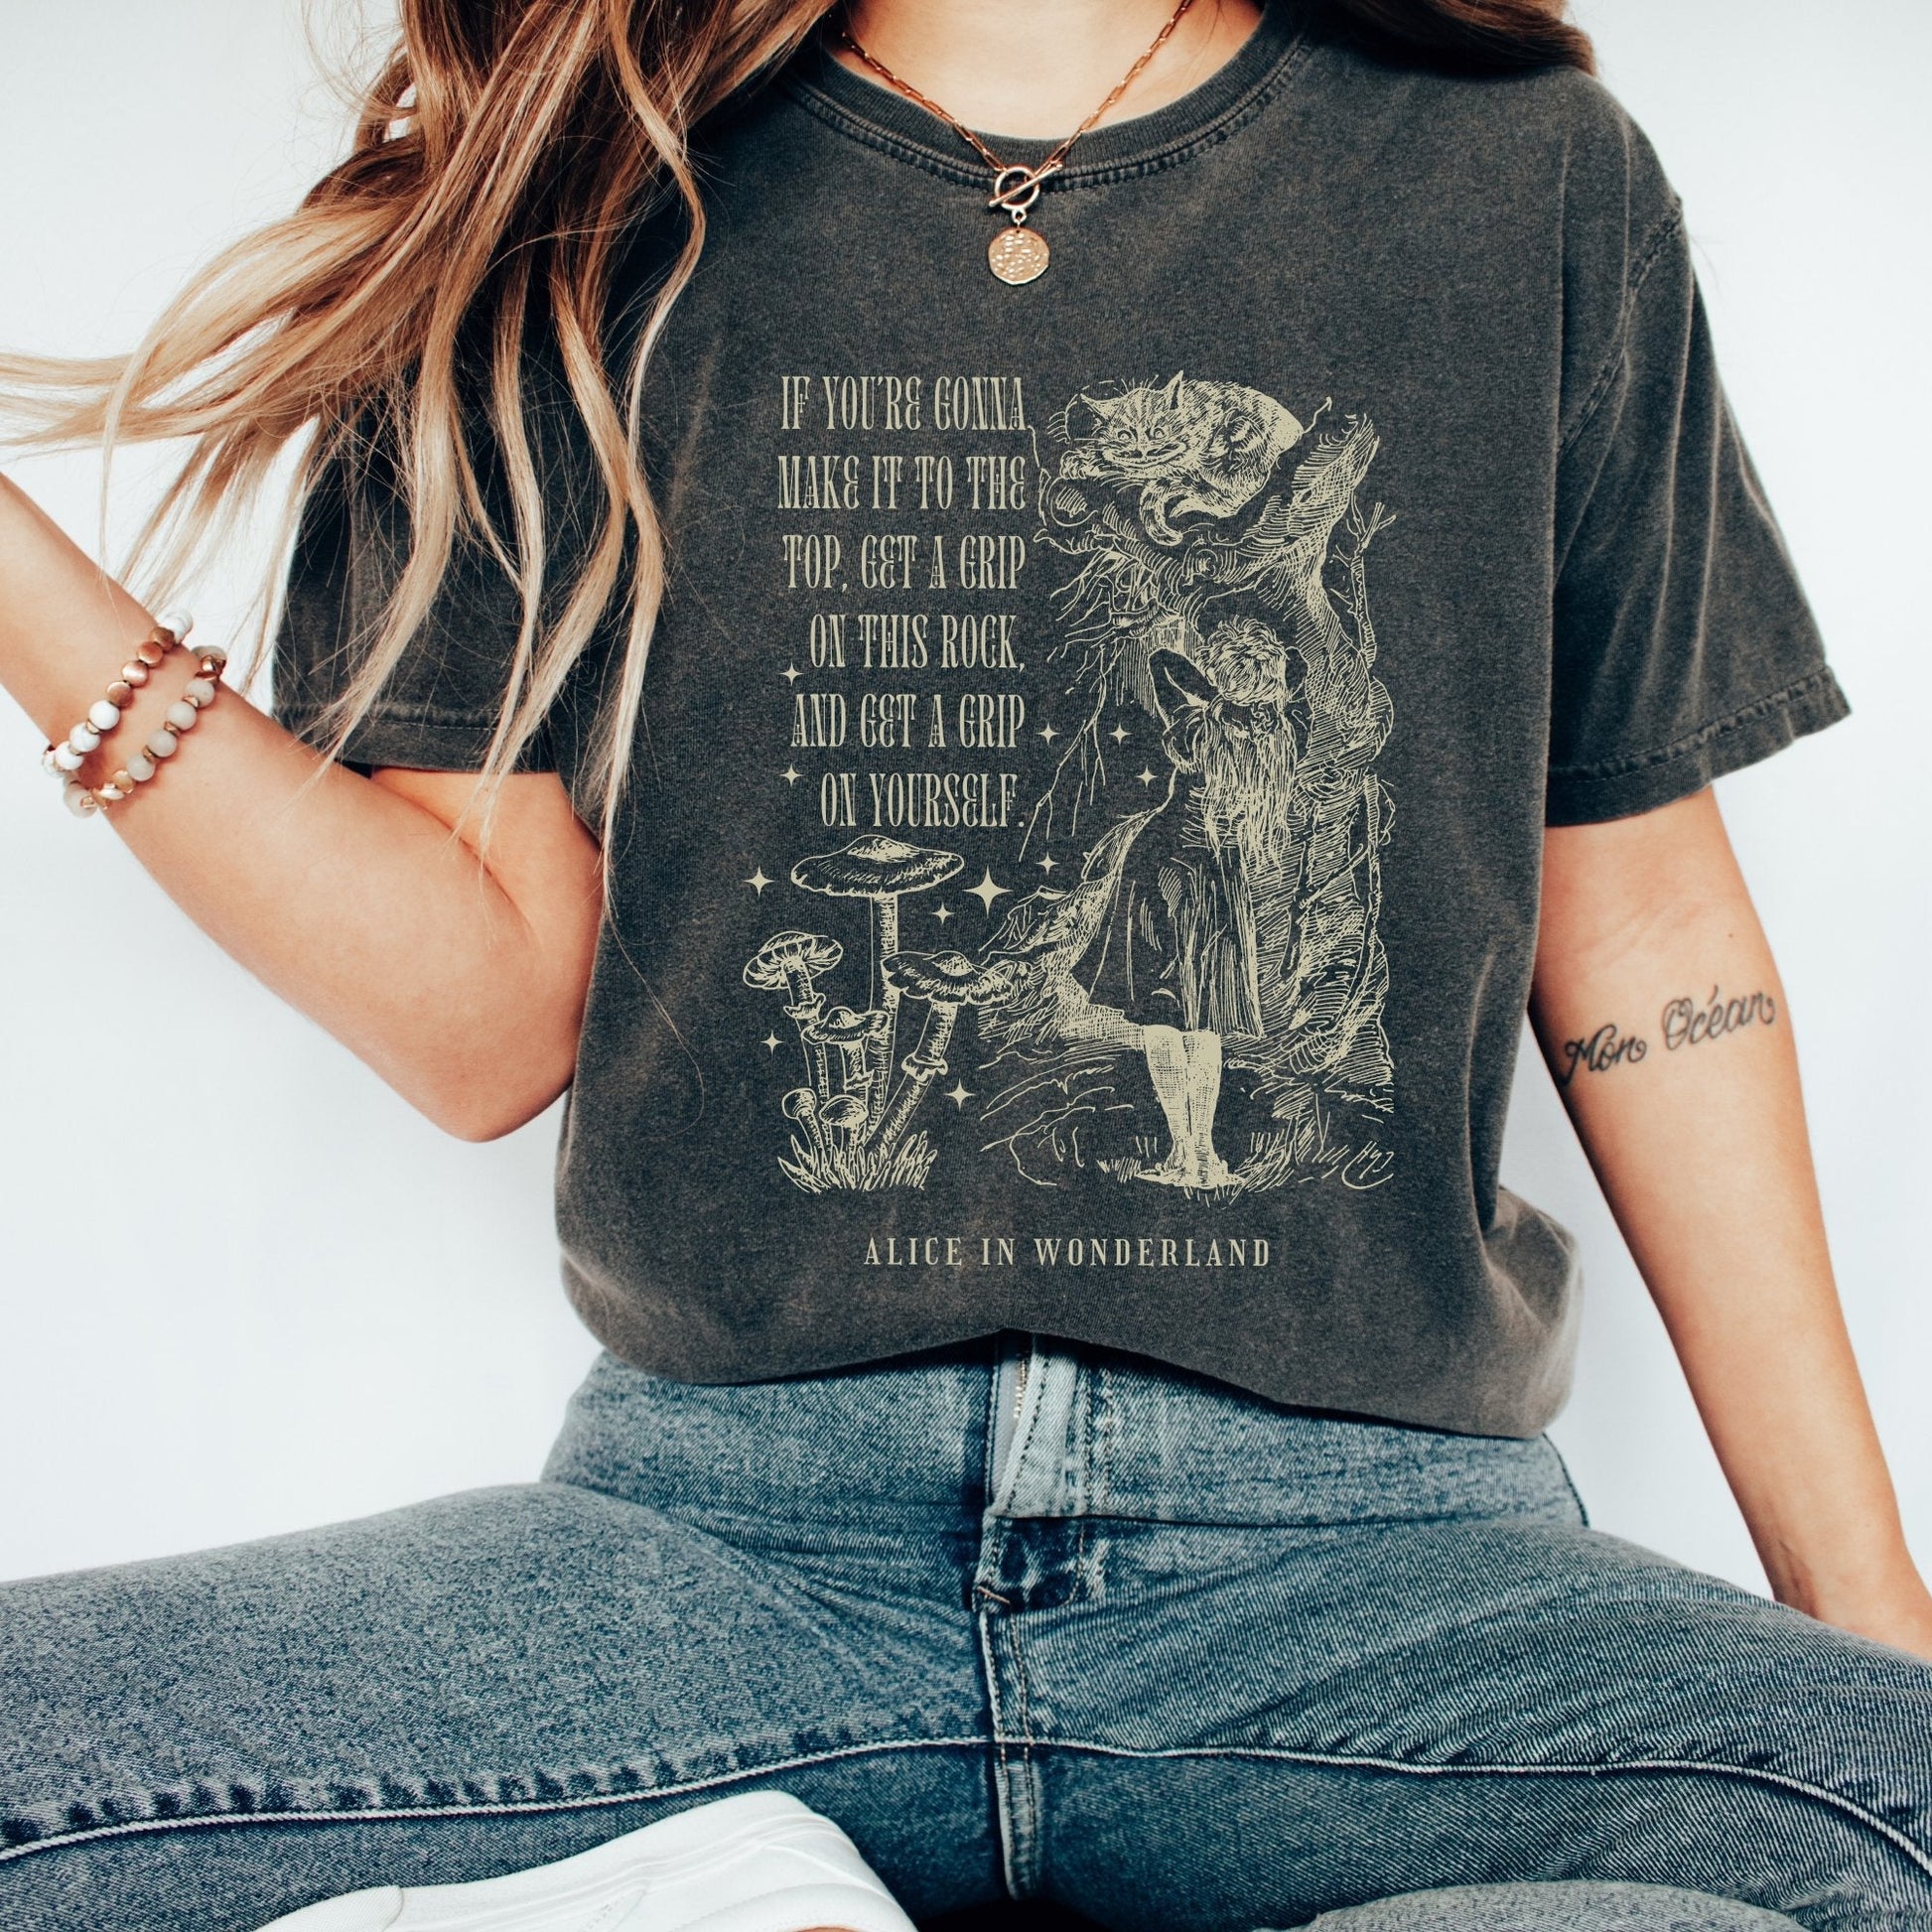 If you are gonna make it to the top, get a grip on this rock, and get a grip on yourself T Shirt, Alice In Wonderland Shirt - AFADesignsCo